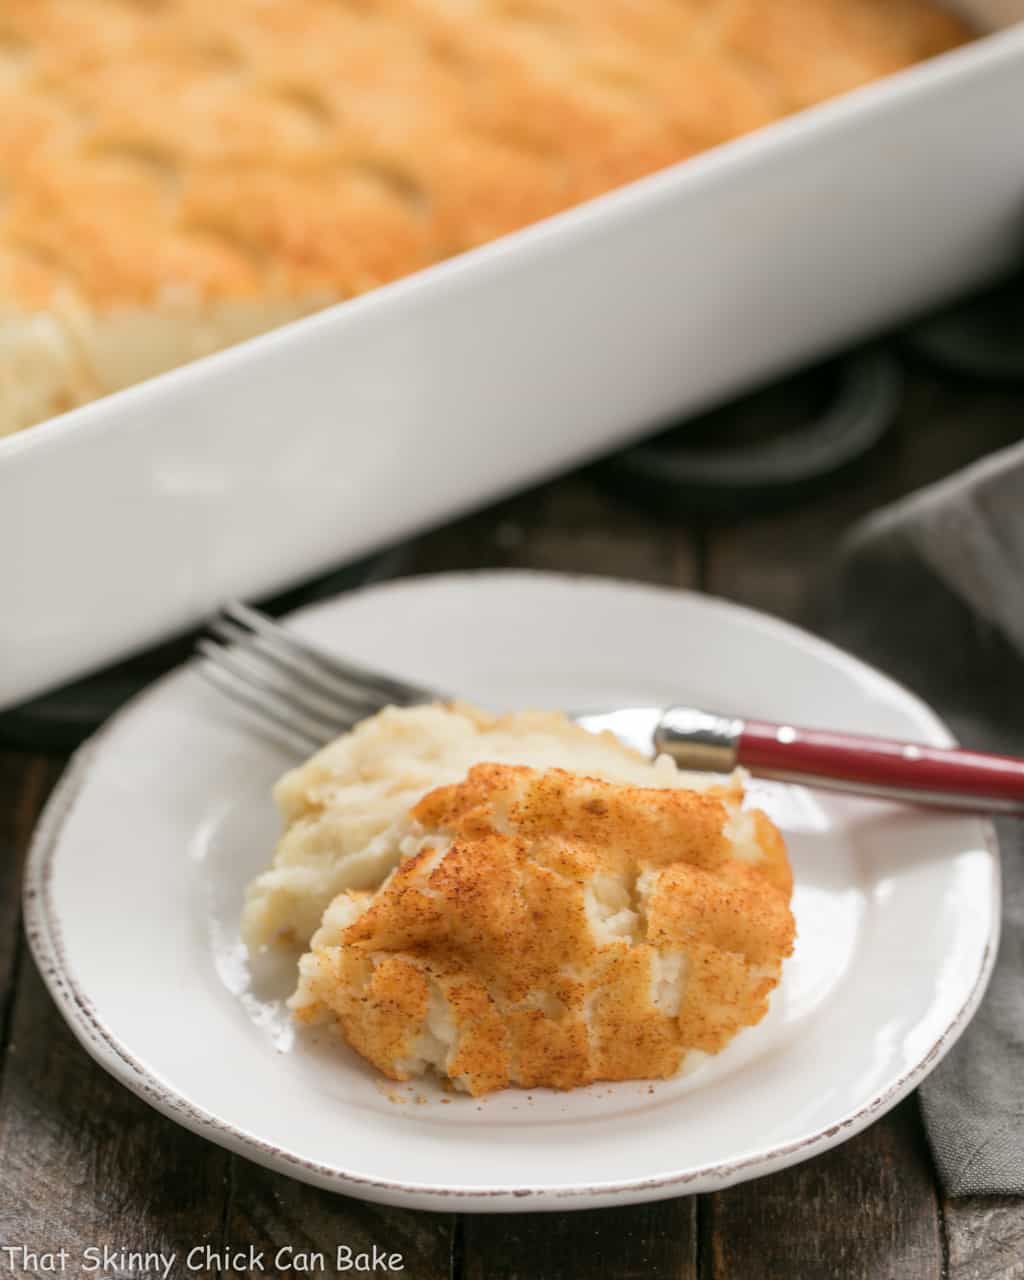 Easy Puffed Potatoes Casserole on a small white plate with a red handle fork.